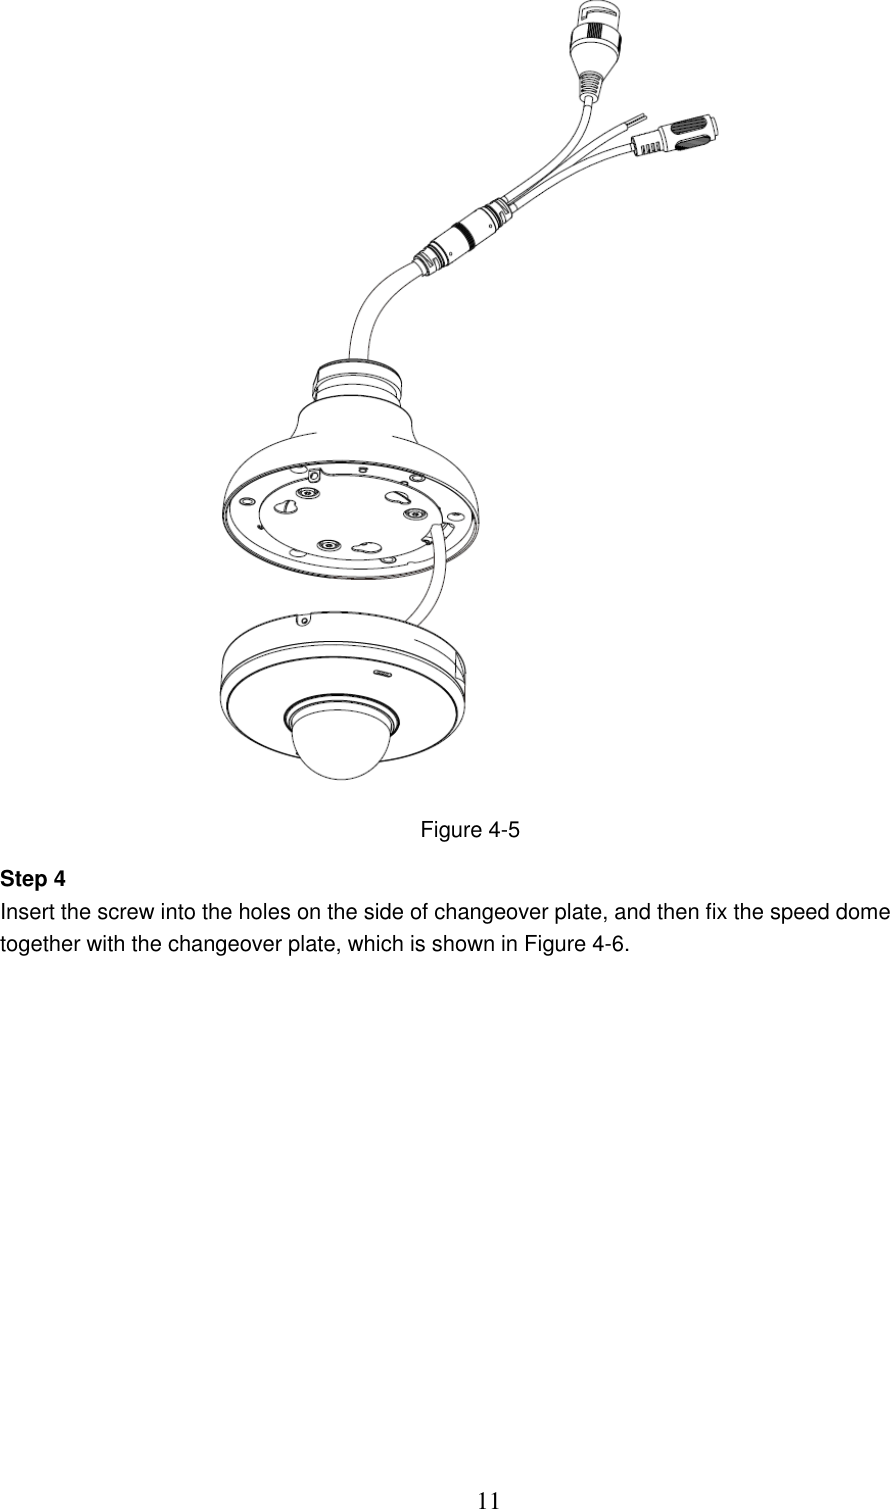  11  Figure 4-5 Step 4 Insert the screw into the holes on the side of changeover plate, and then fix the speed dome together with the changeover plate, which is shown in Figure 4-6. 